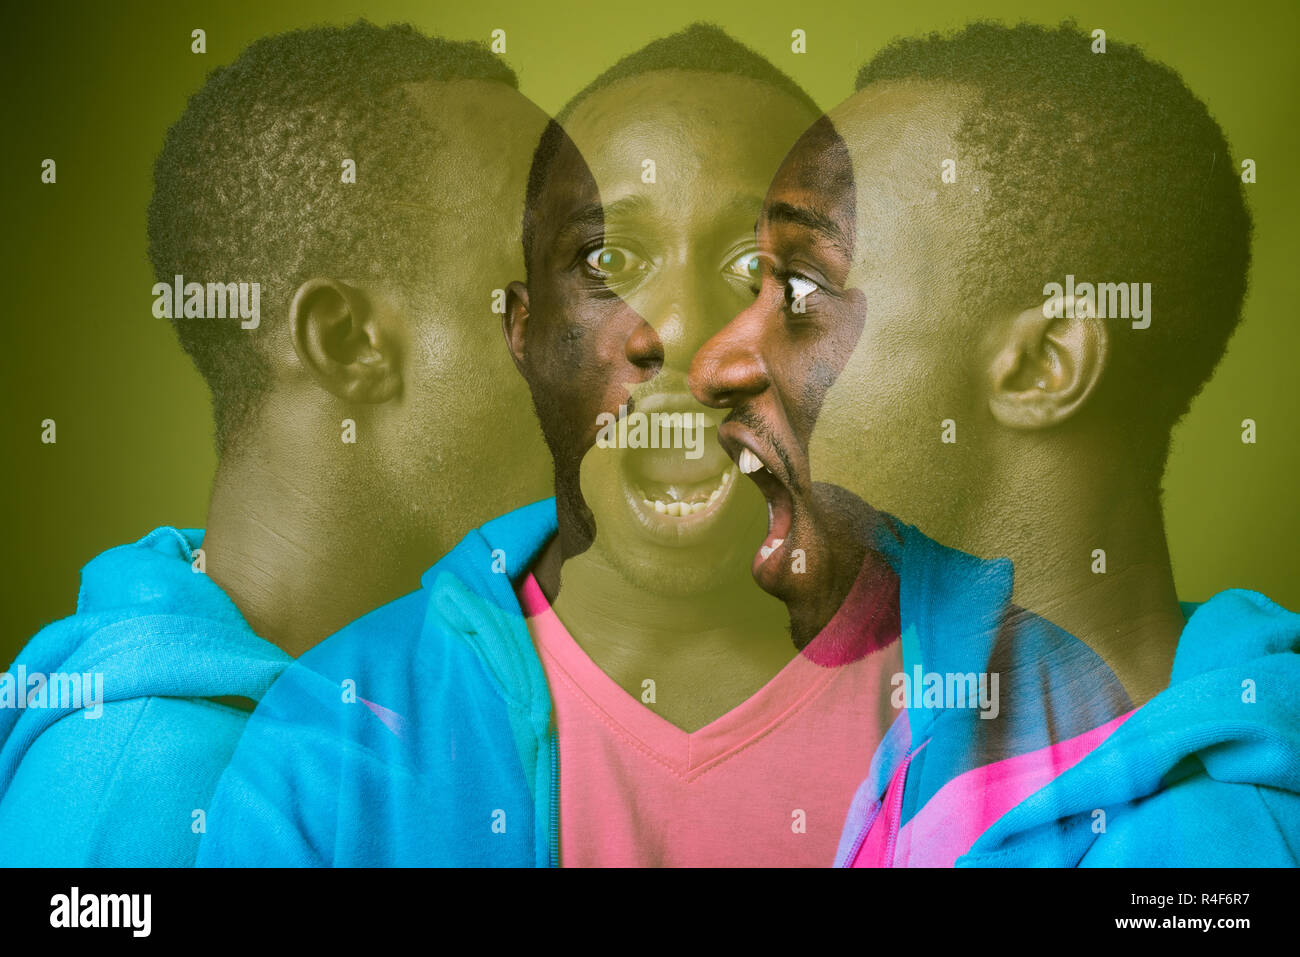 Double exposure shot of young African man against green background Stock Photo